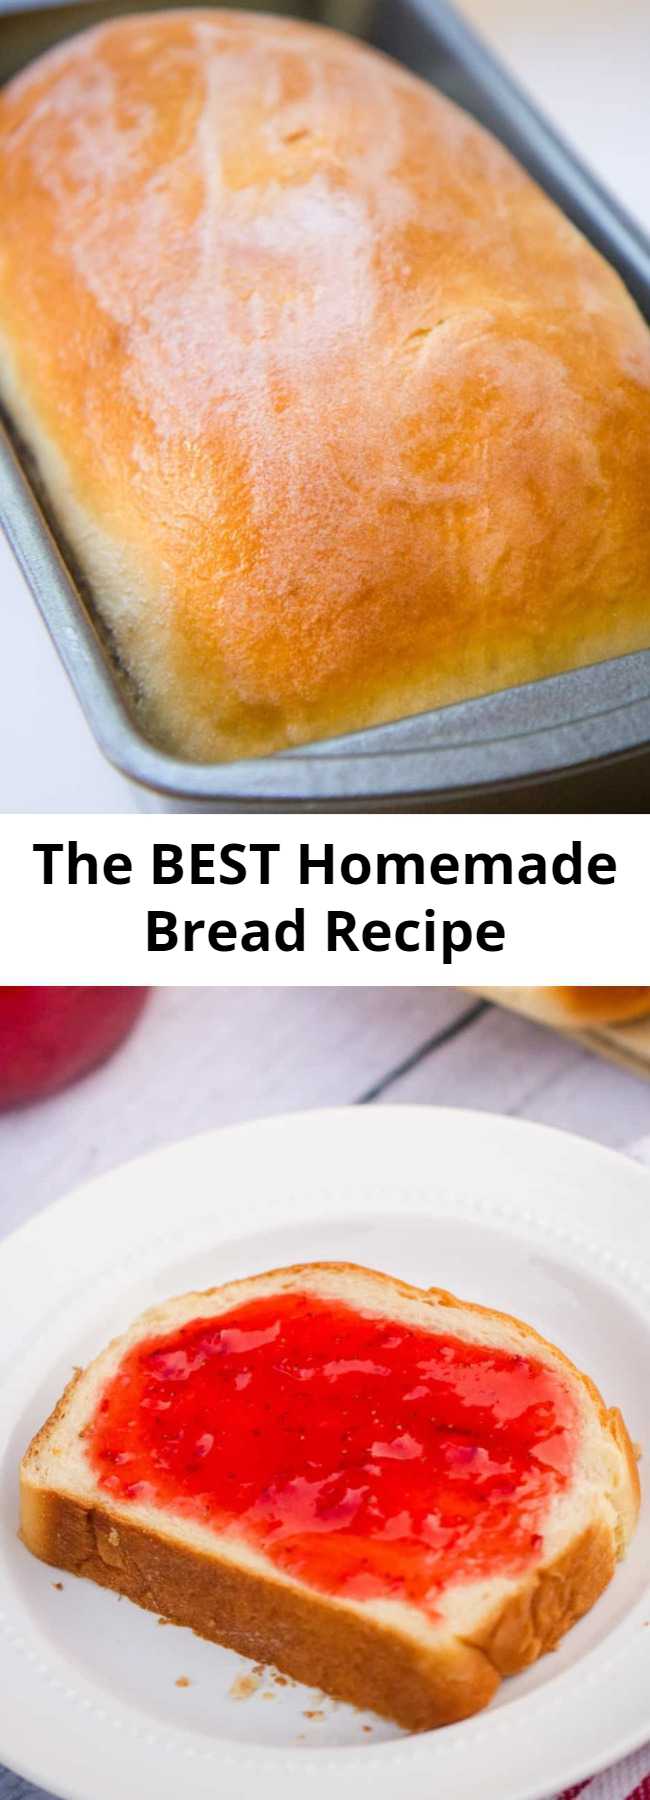 The BEST Homemade Bread Recipe - Delicious homemade bread - The BEST bread recipe that's super soft and has the perfect touch of sweetness. Top it with fresh homemade jam for the ultimate treat. There's nothing better than a slice of homemade bread! #bread #homemade #recipes #best #loaf